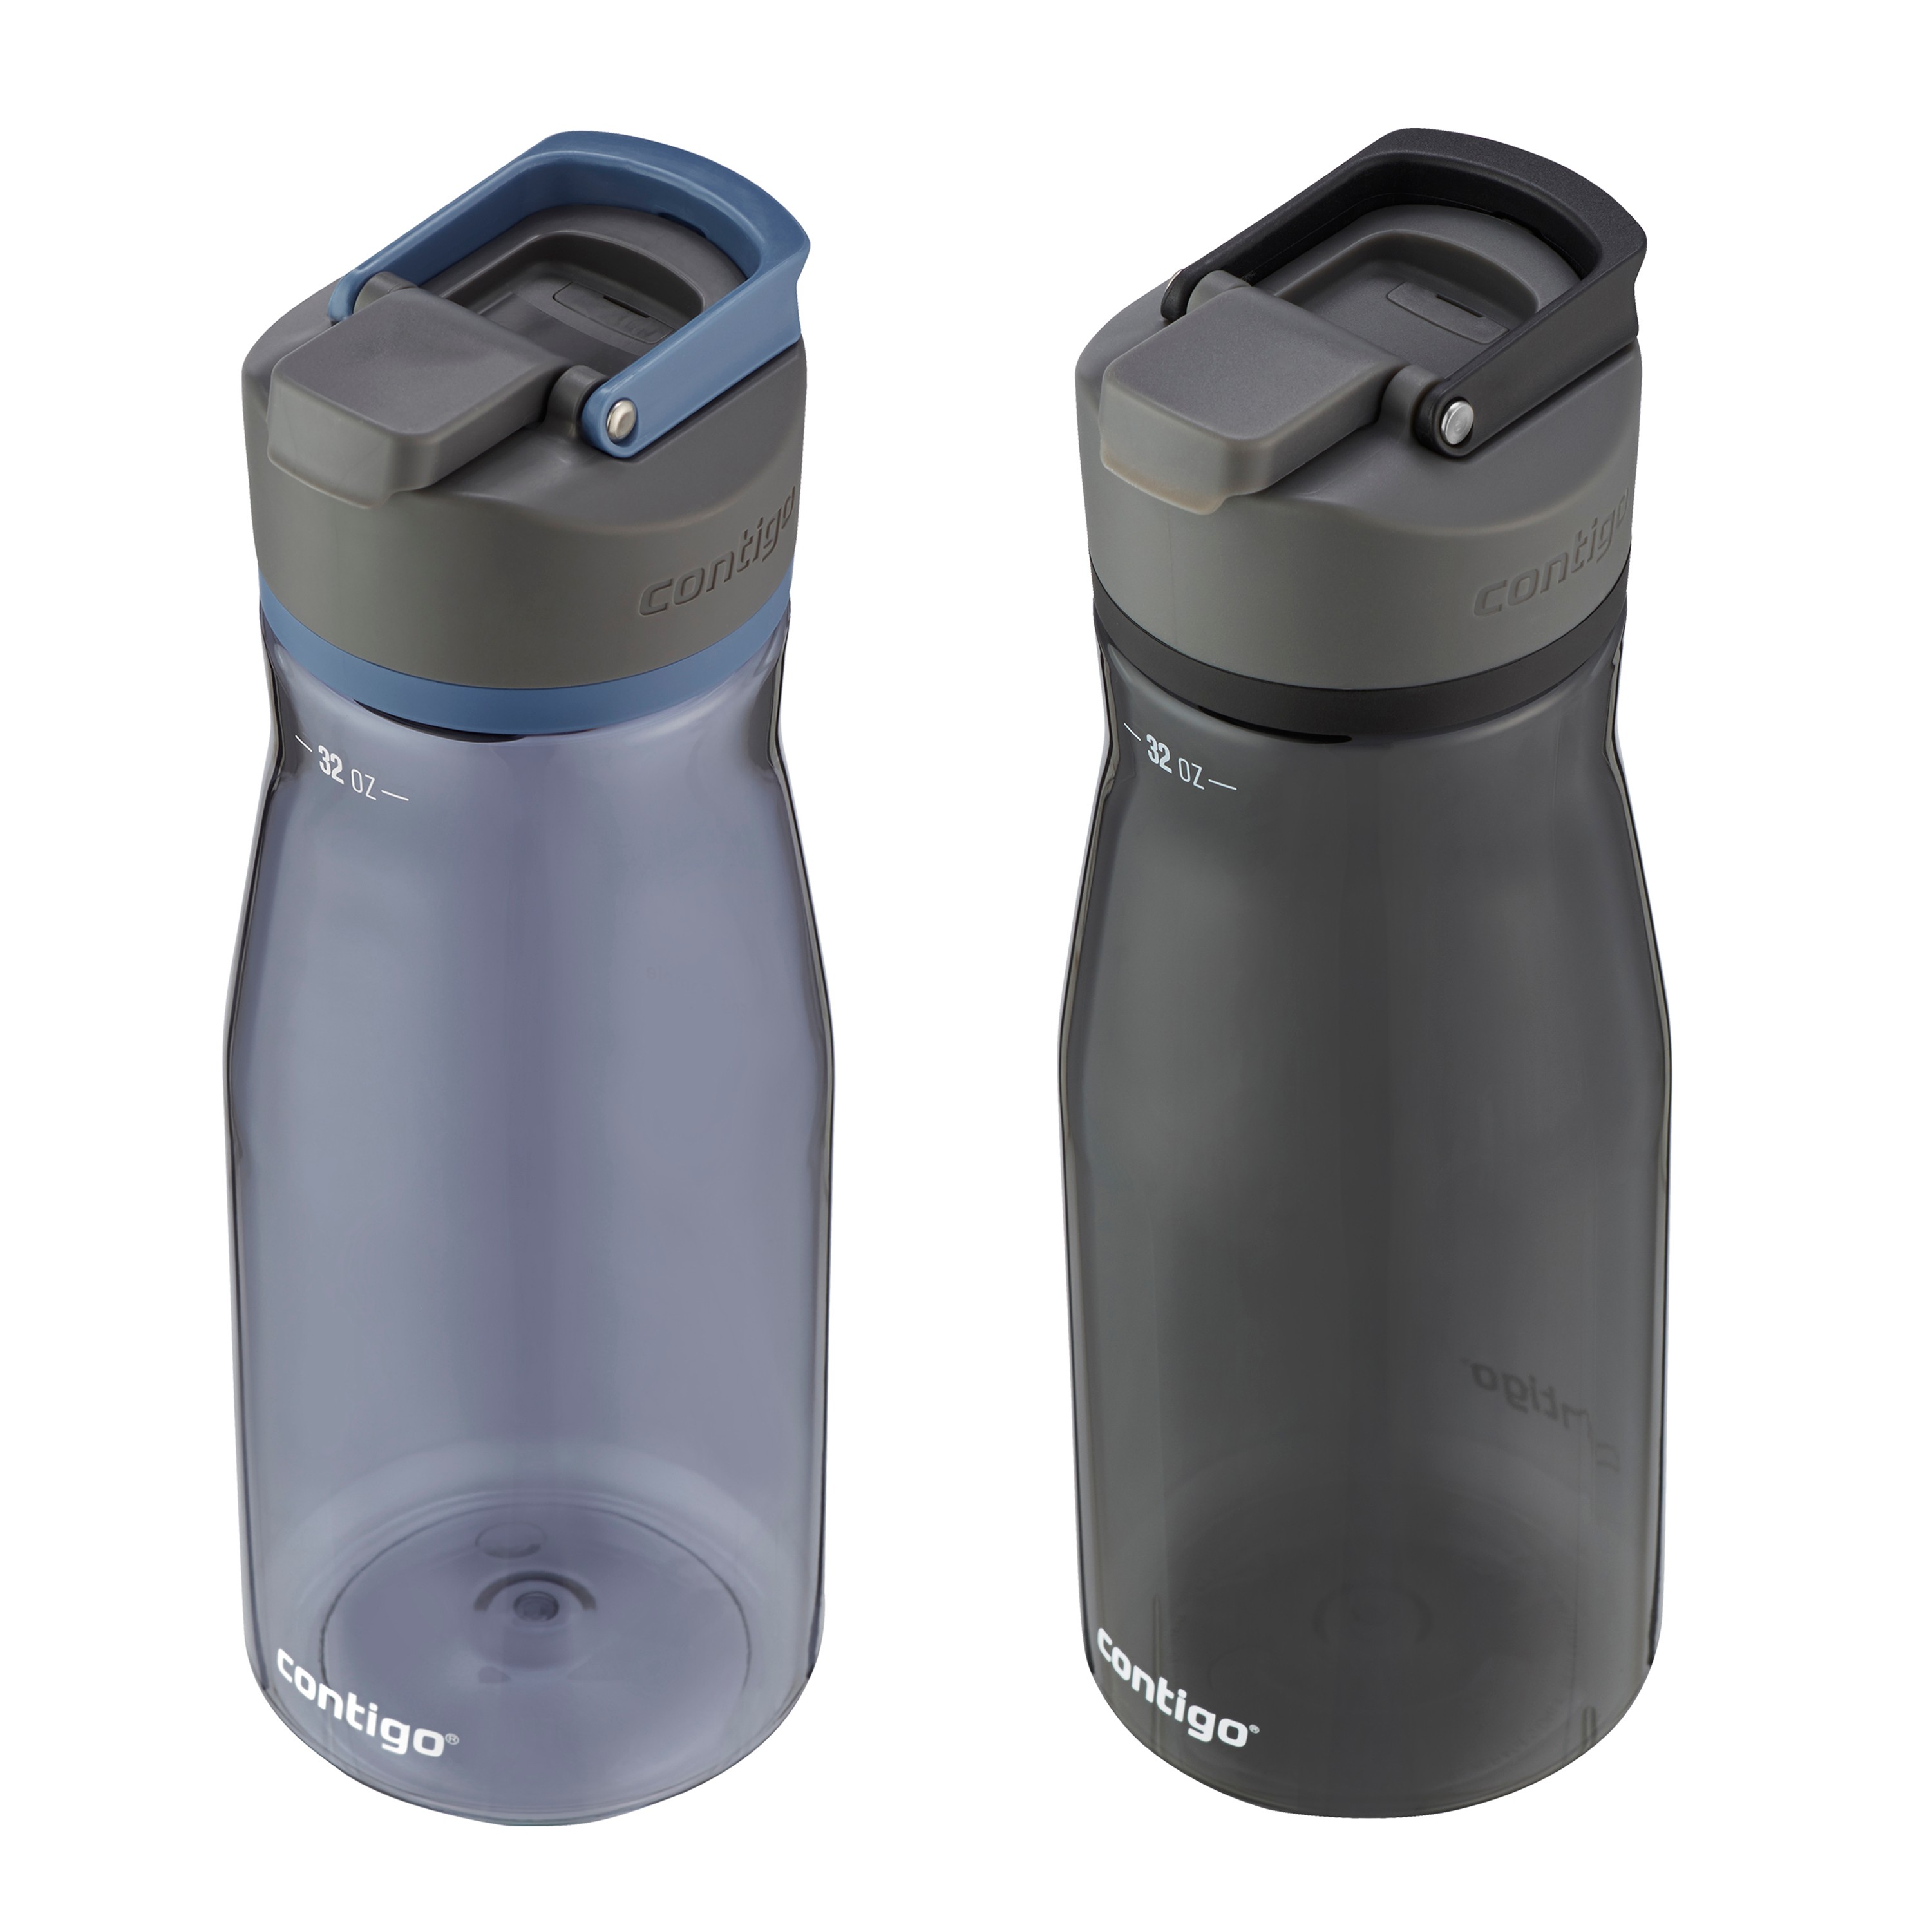 Contigo Cortland Chill Stainless Steel Water Bottle with AUTOSEAL Lid with  Licorice, 32 fl oz. 